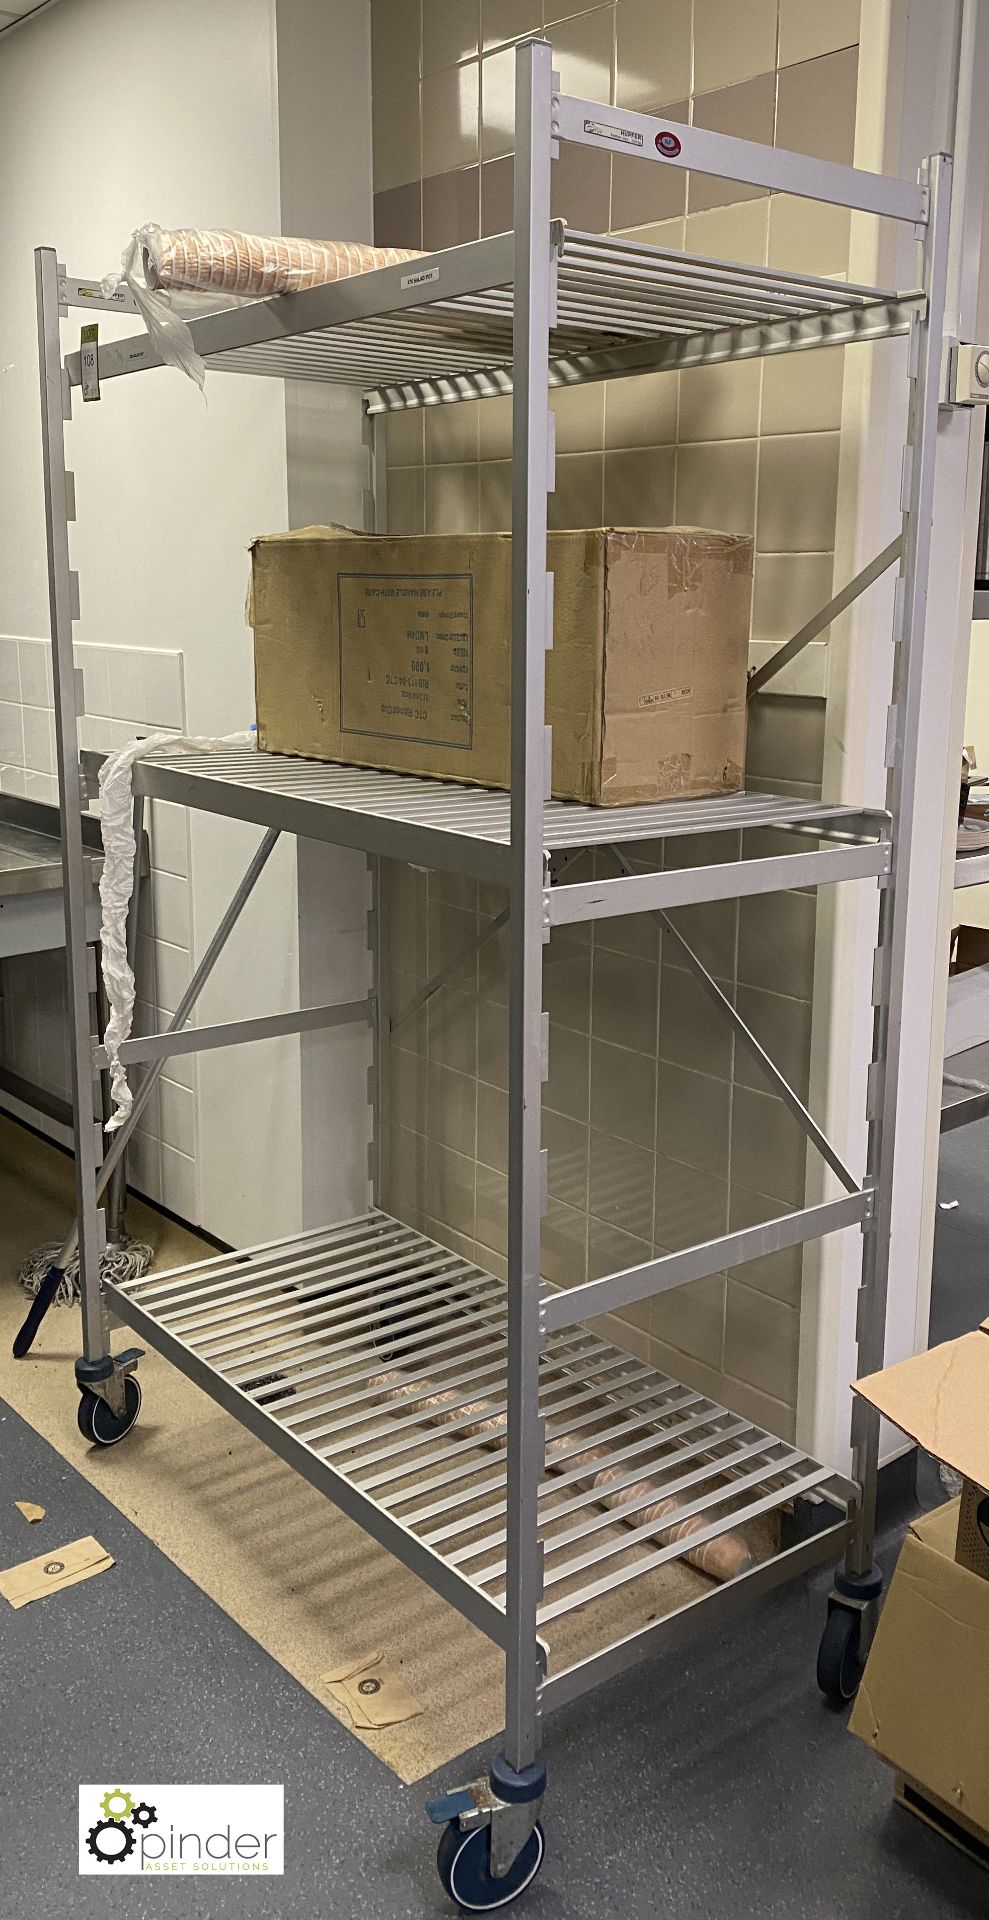 Hupfer mobile adjustable 3-shelf Rack, 1200mm x 610mm x 1950mm (contents not included) (lot location - Image 2 of 3